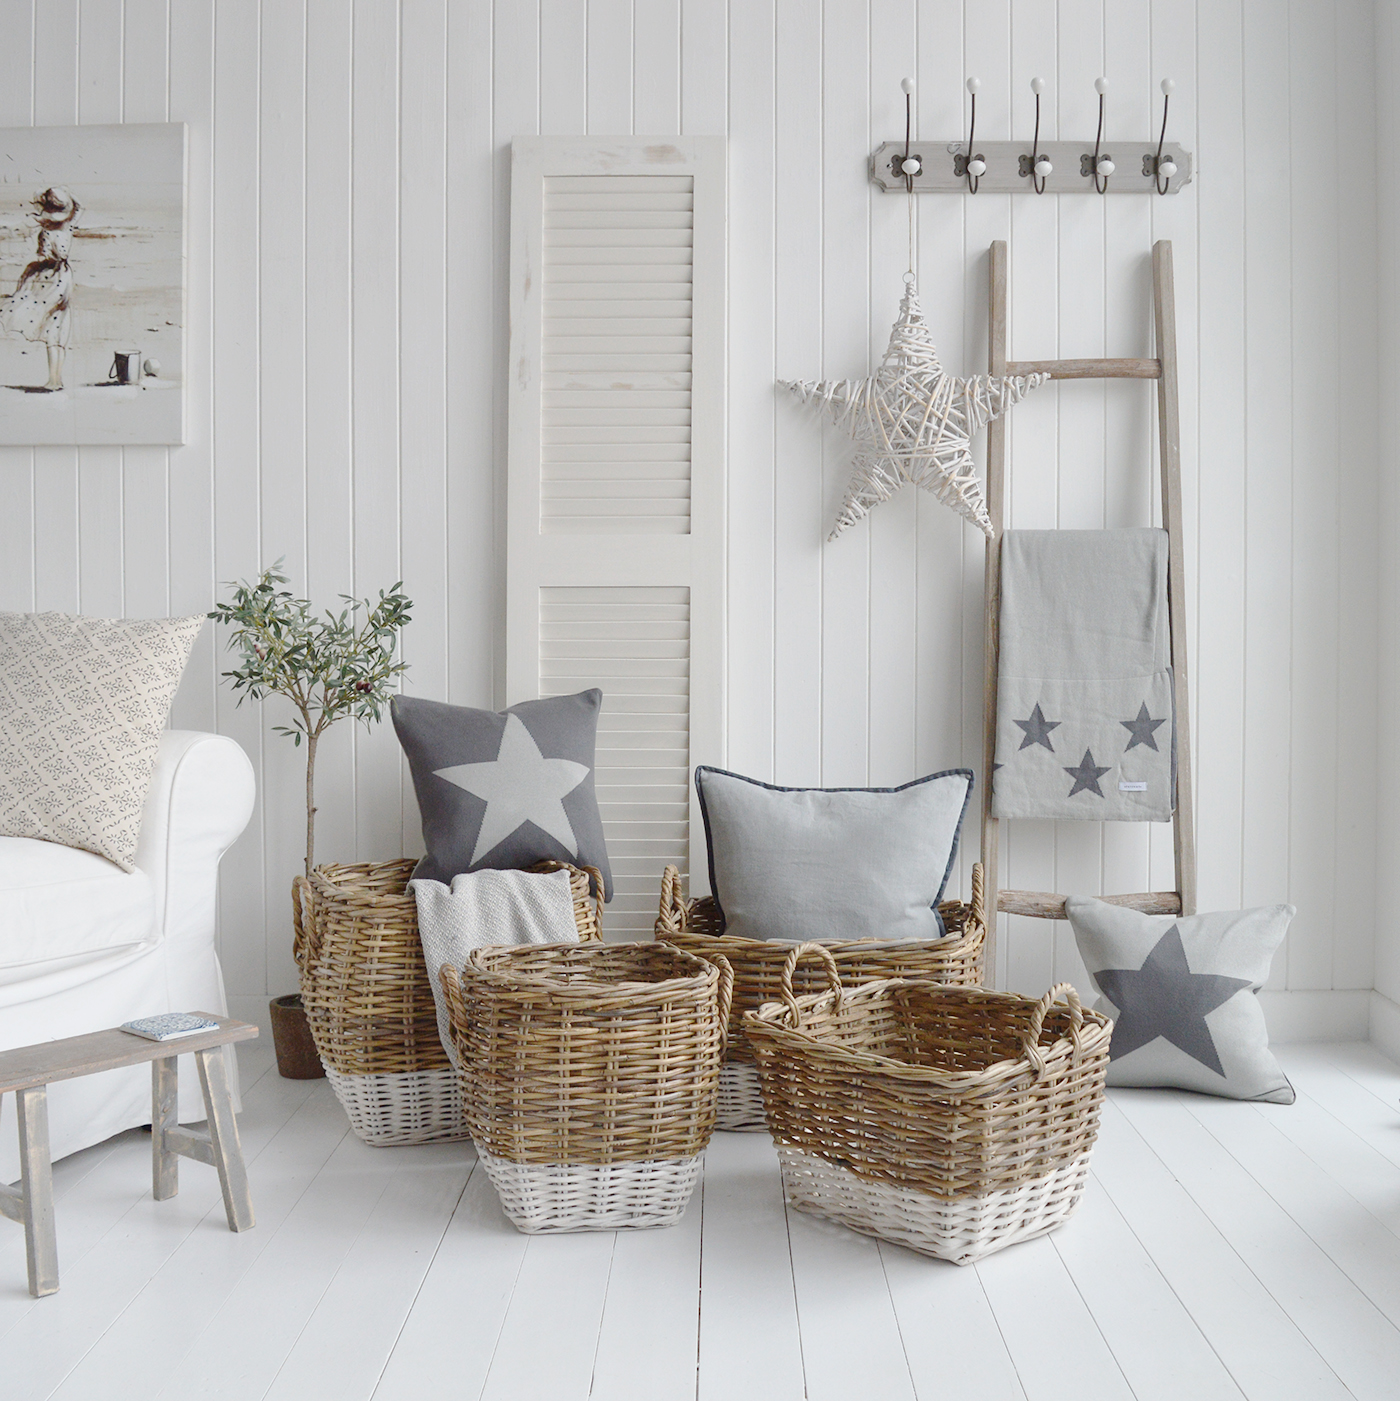 New England style home accessories and furniture for modern farmhouse, country and coastal home interiors